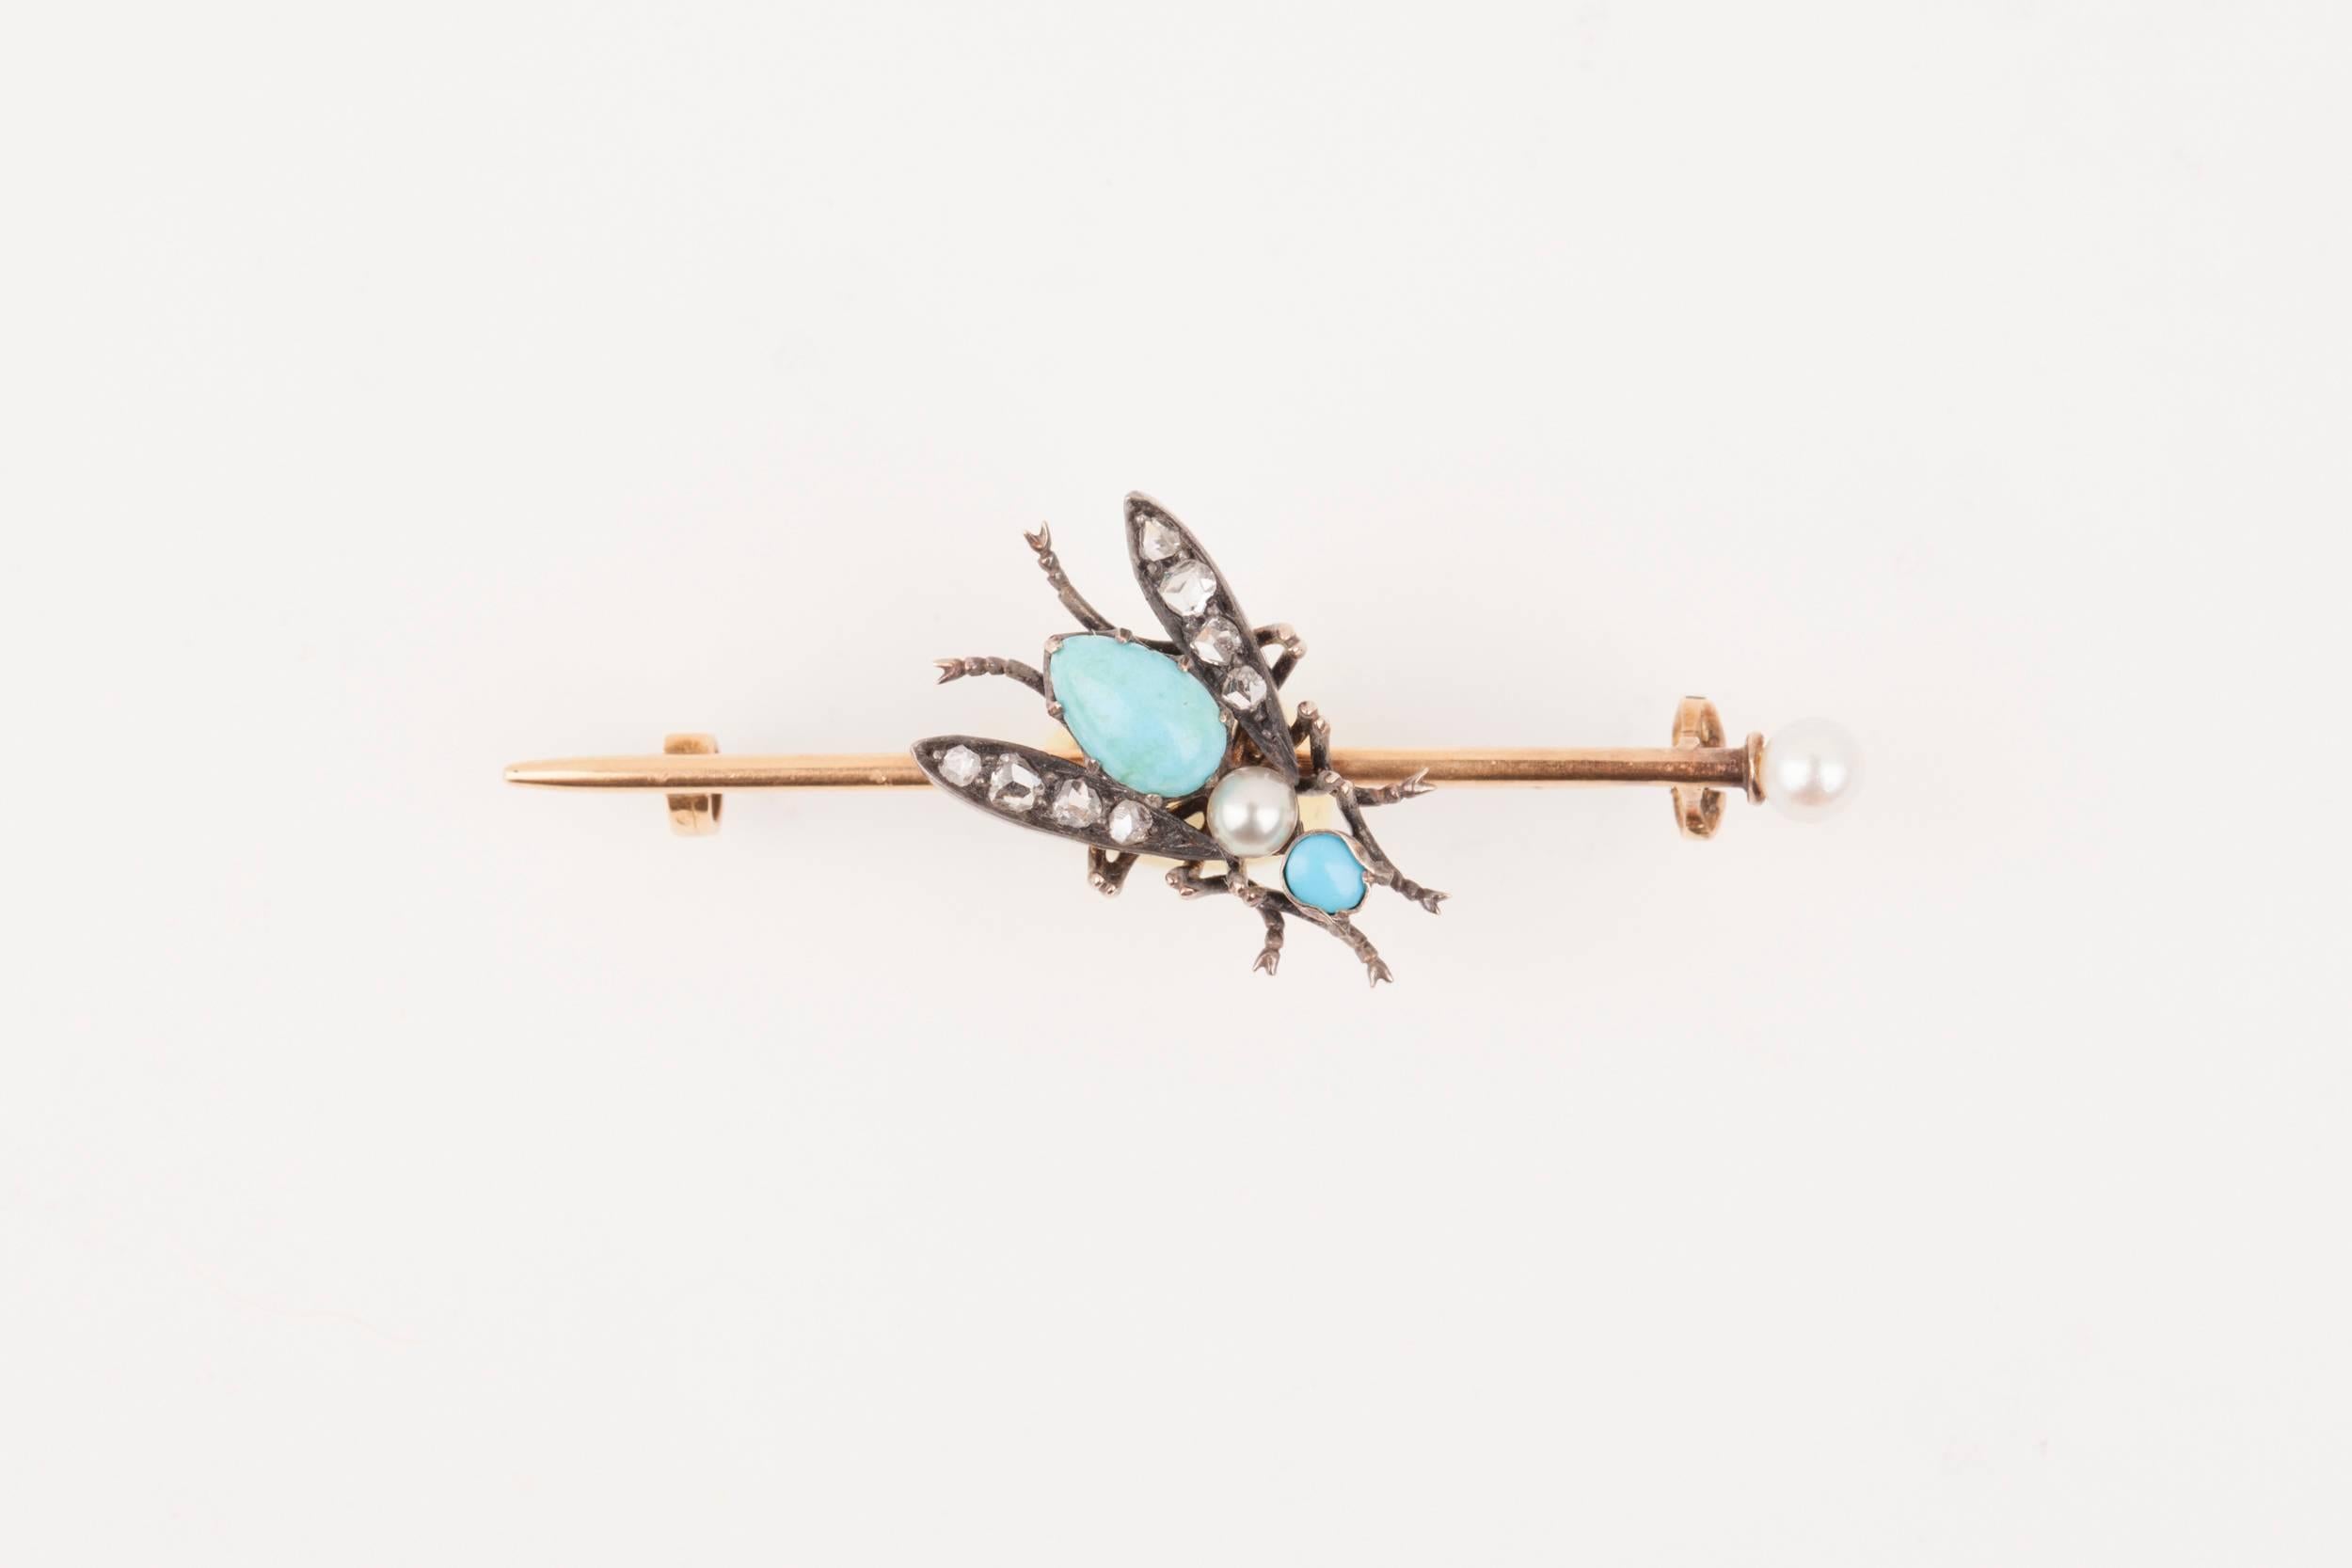 Beautiful barrette brooch, french made circa 1860. 
Gold 18K and silver, set with turquoises, rose cut diamonds and natural pearls.
Weight: 4.40 grams
Dimensions: 5*2 cm
